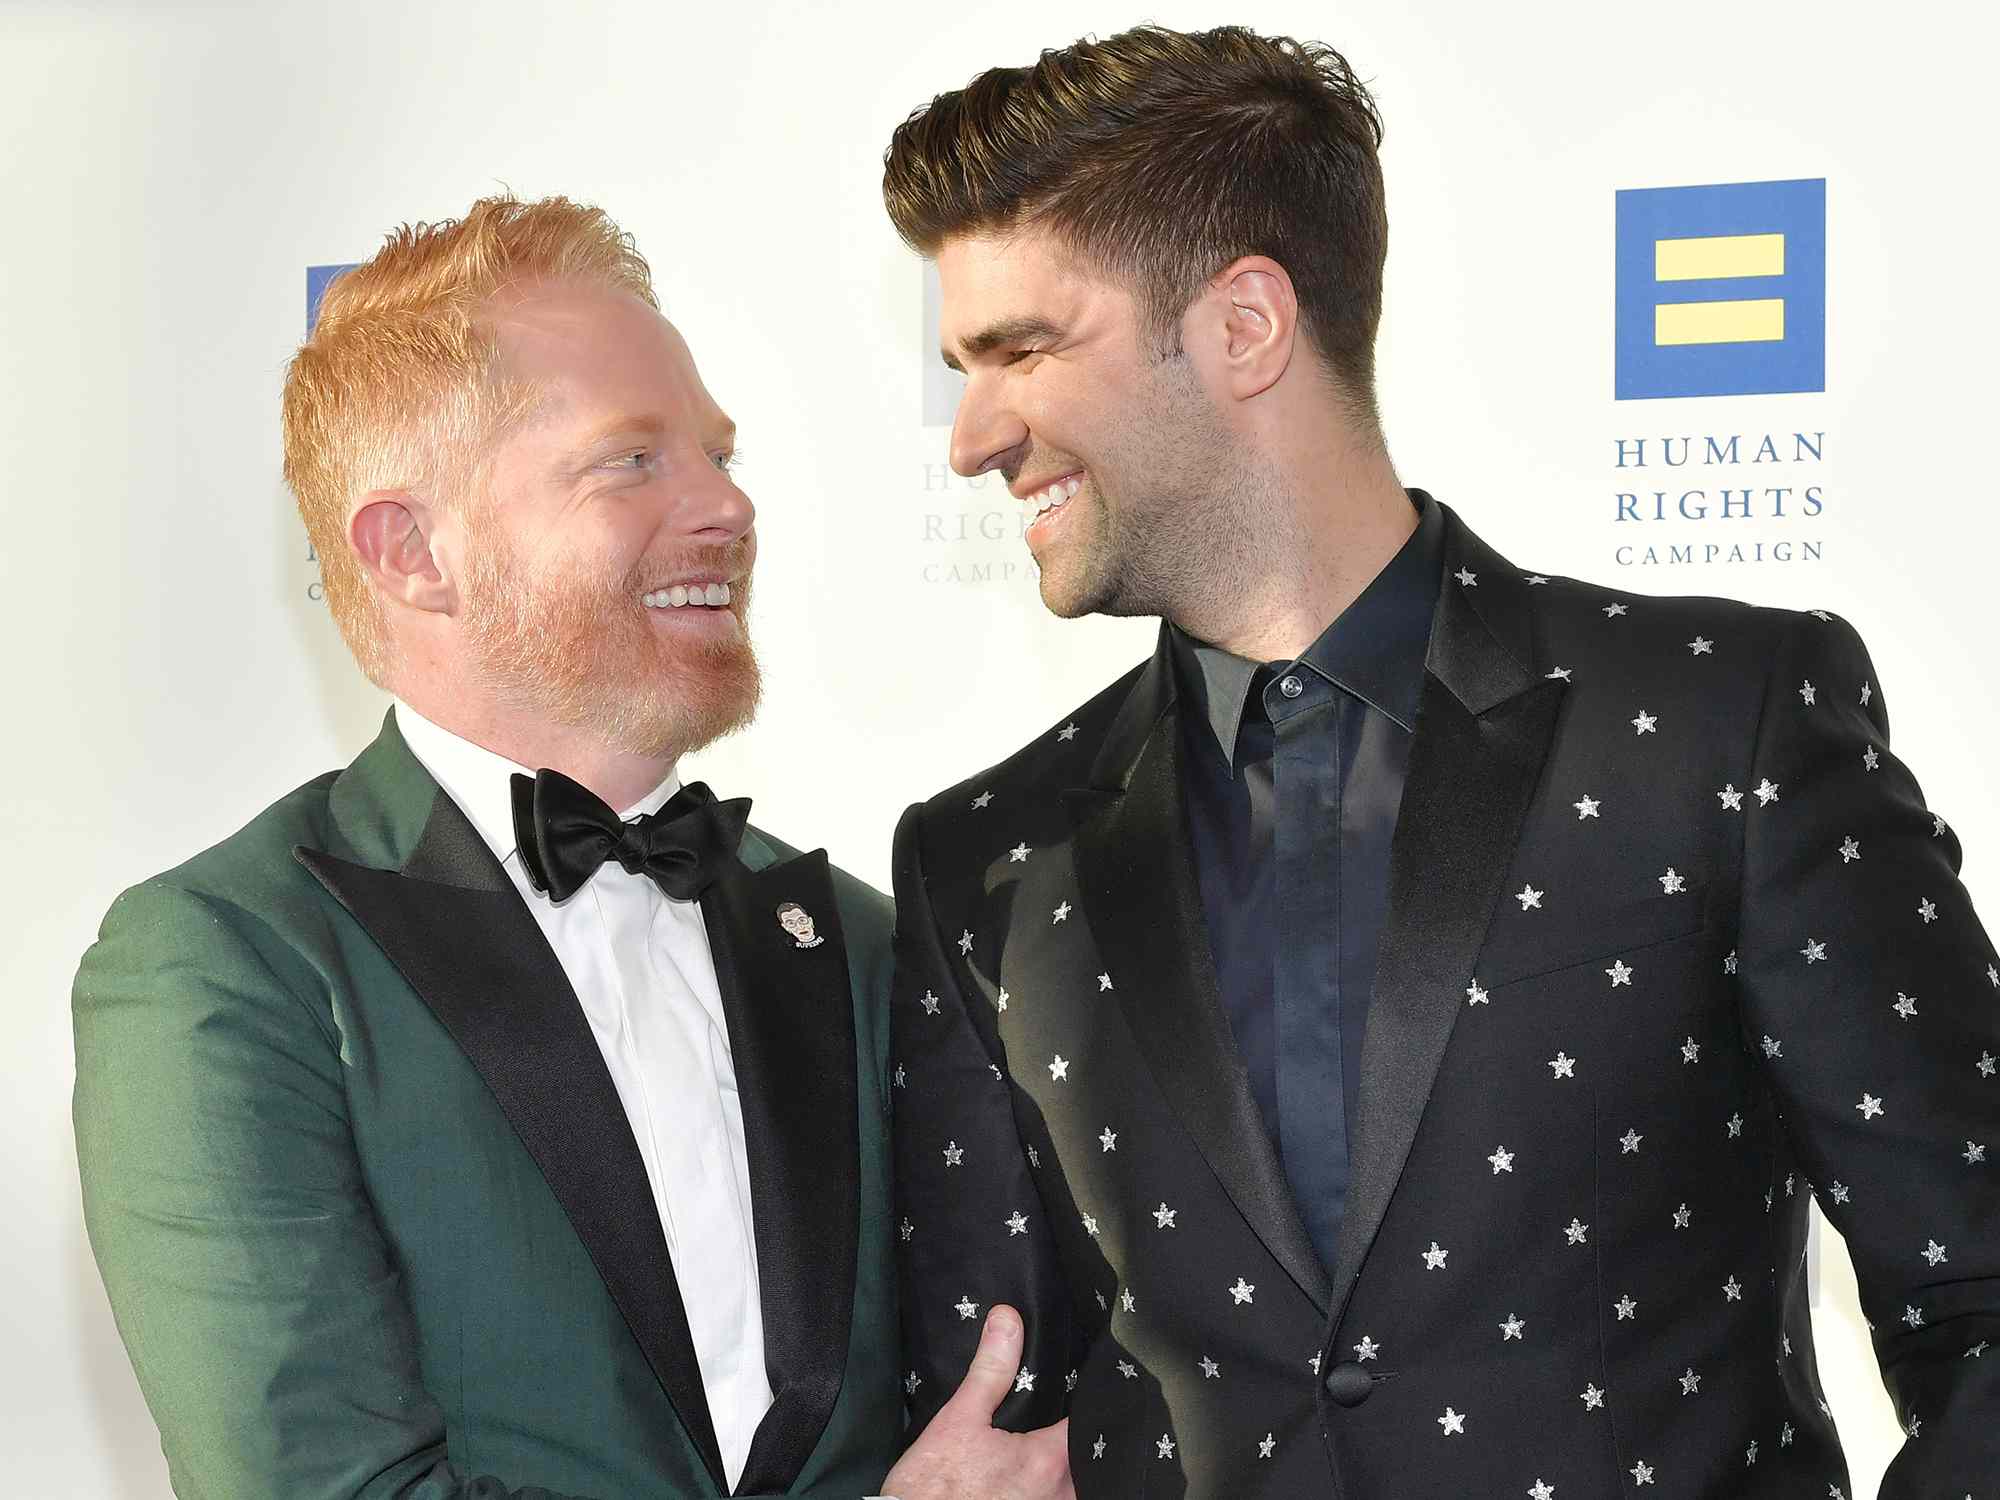 Jesse Tyler Ferguson and Justin Mikita attend the Human Rights Campaign 2019 Los Angeles Dinner at JW Marriott Los Angeles at L.A. LIVE on March 30, 2019 in Los Angeles, California